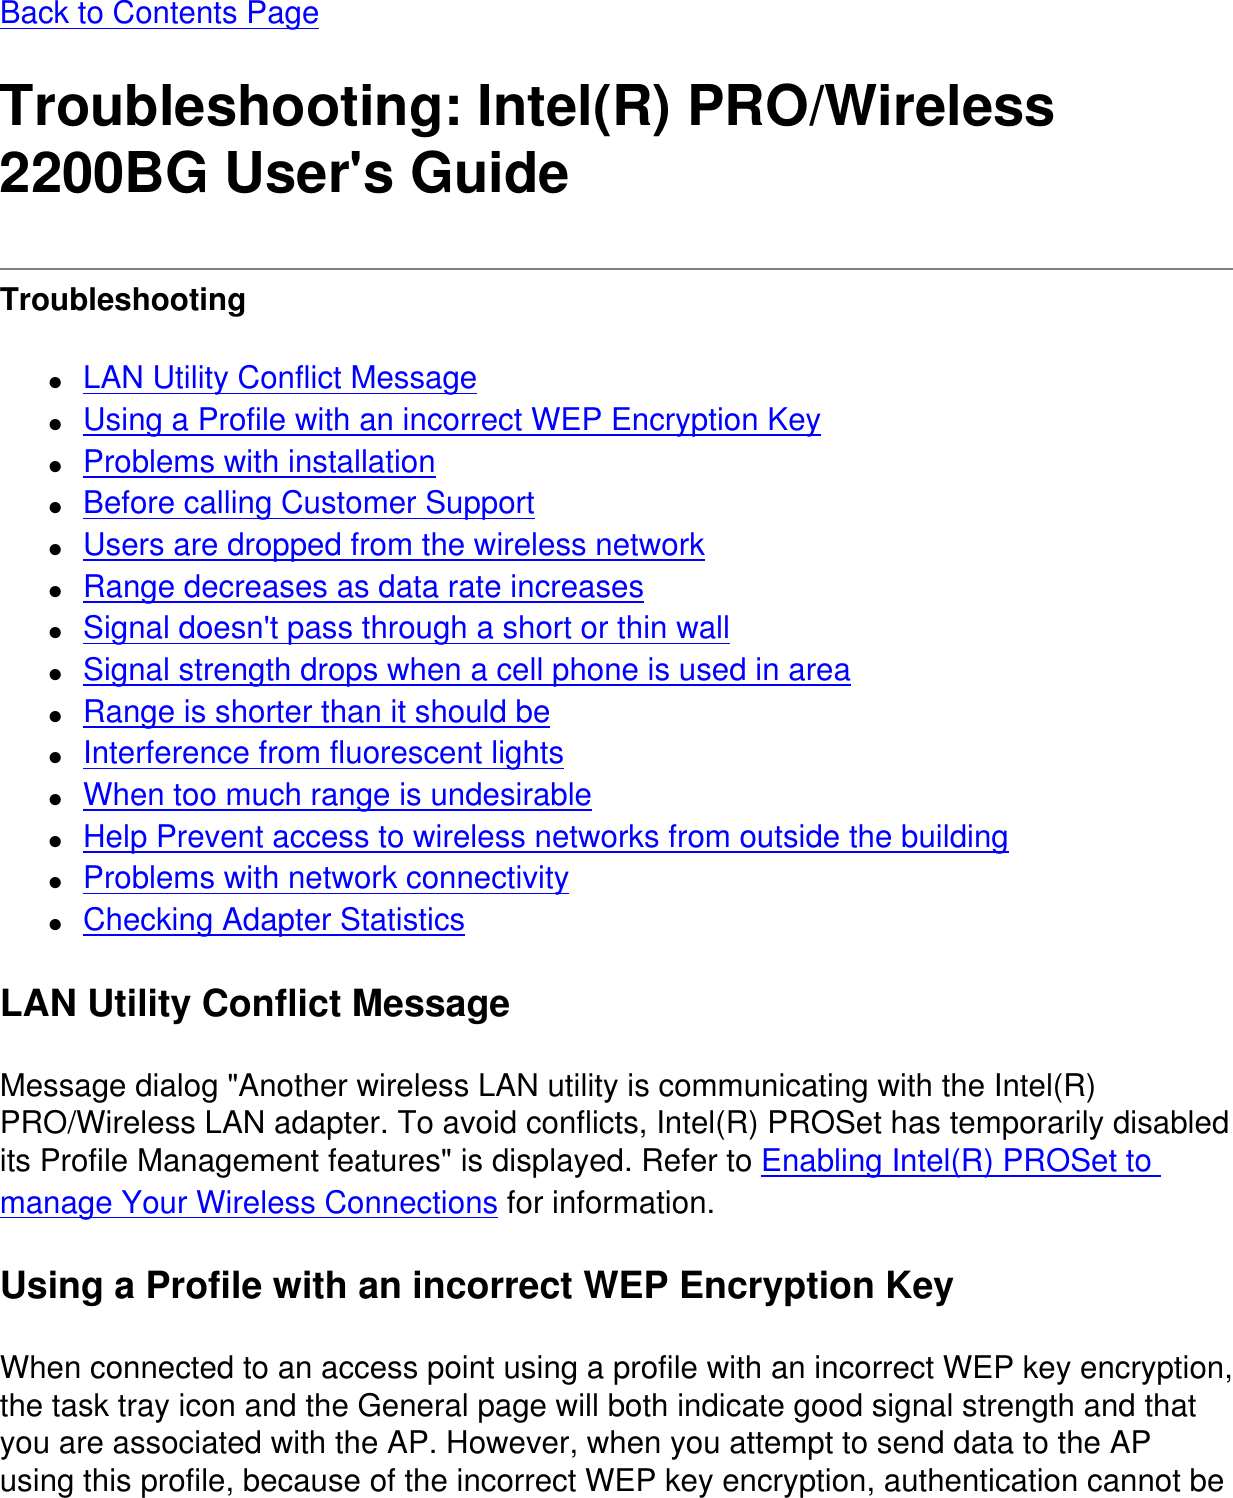 Back to Contents PageTroubleshooting: Intel(R) PRO/Wireless 2200BG User&apos;s GuideTroubleshooting ●     LAN Utility Conflict Message●     Using a Profile with an incorrect WEP Encryption Key●     Problems with installation●     Before calling Customer Support●     Users are dropped from the wireless network●     Range decreases as data rate increases●     Signal doesn&apos;t pass through a short or thin wall●     Signal strength drops when a cell phone is used in area●     Range is shorter than it should be●     Interference from fluorescent lights●     When too much range is undesirable●     Help Prevent access to wireless networks from outside the building●     Problems with network connectivity●     Checking Adapter StatisticsLAN Utility Conflict MessageMessage dialog &quot;Another wireless LAN utility is communicating with the Intel(R) PRO/Wireless LAN adapter. To avoid conflicts, Intel(R) PROSet has temporarily disabled its Profile Management features&quot; is displayed. Refer to Enabling Intel(R) PROSet to manage Your Wireless Connections for information.Using a Profile with an incorrect WEP Encryption KeyWhen connected to an access point using a profile with an incorrect WEP key encryption, the task tray icon and the General page will both indicate good signal strength and that you are associated with the AP. However, when you attempt to send data to the AP using this profile, because of the incorrect WEP key encryption, authentication cannot be 